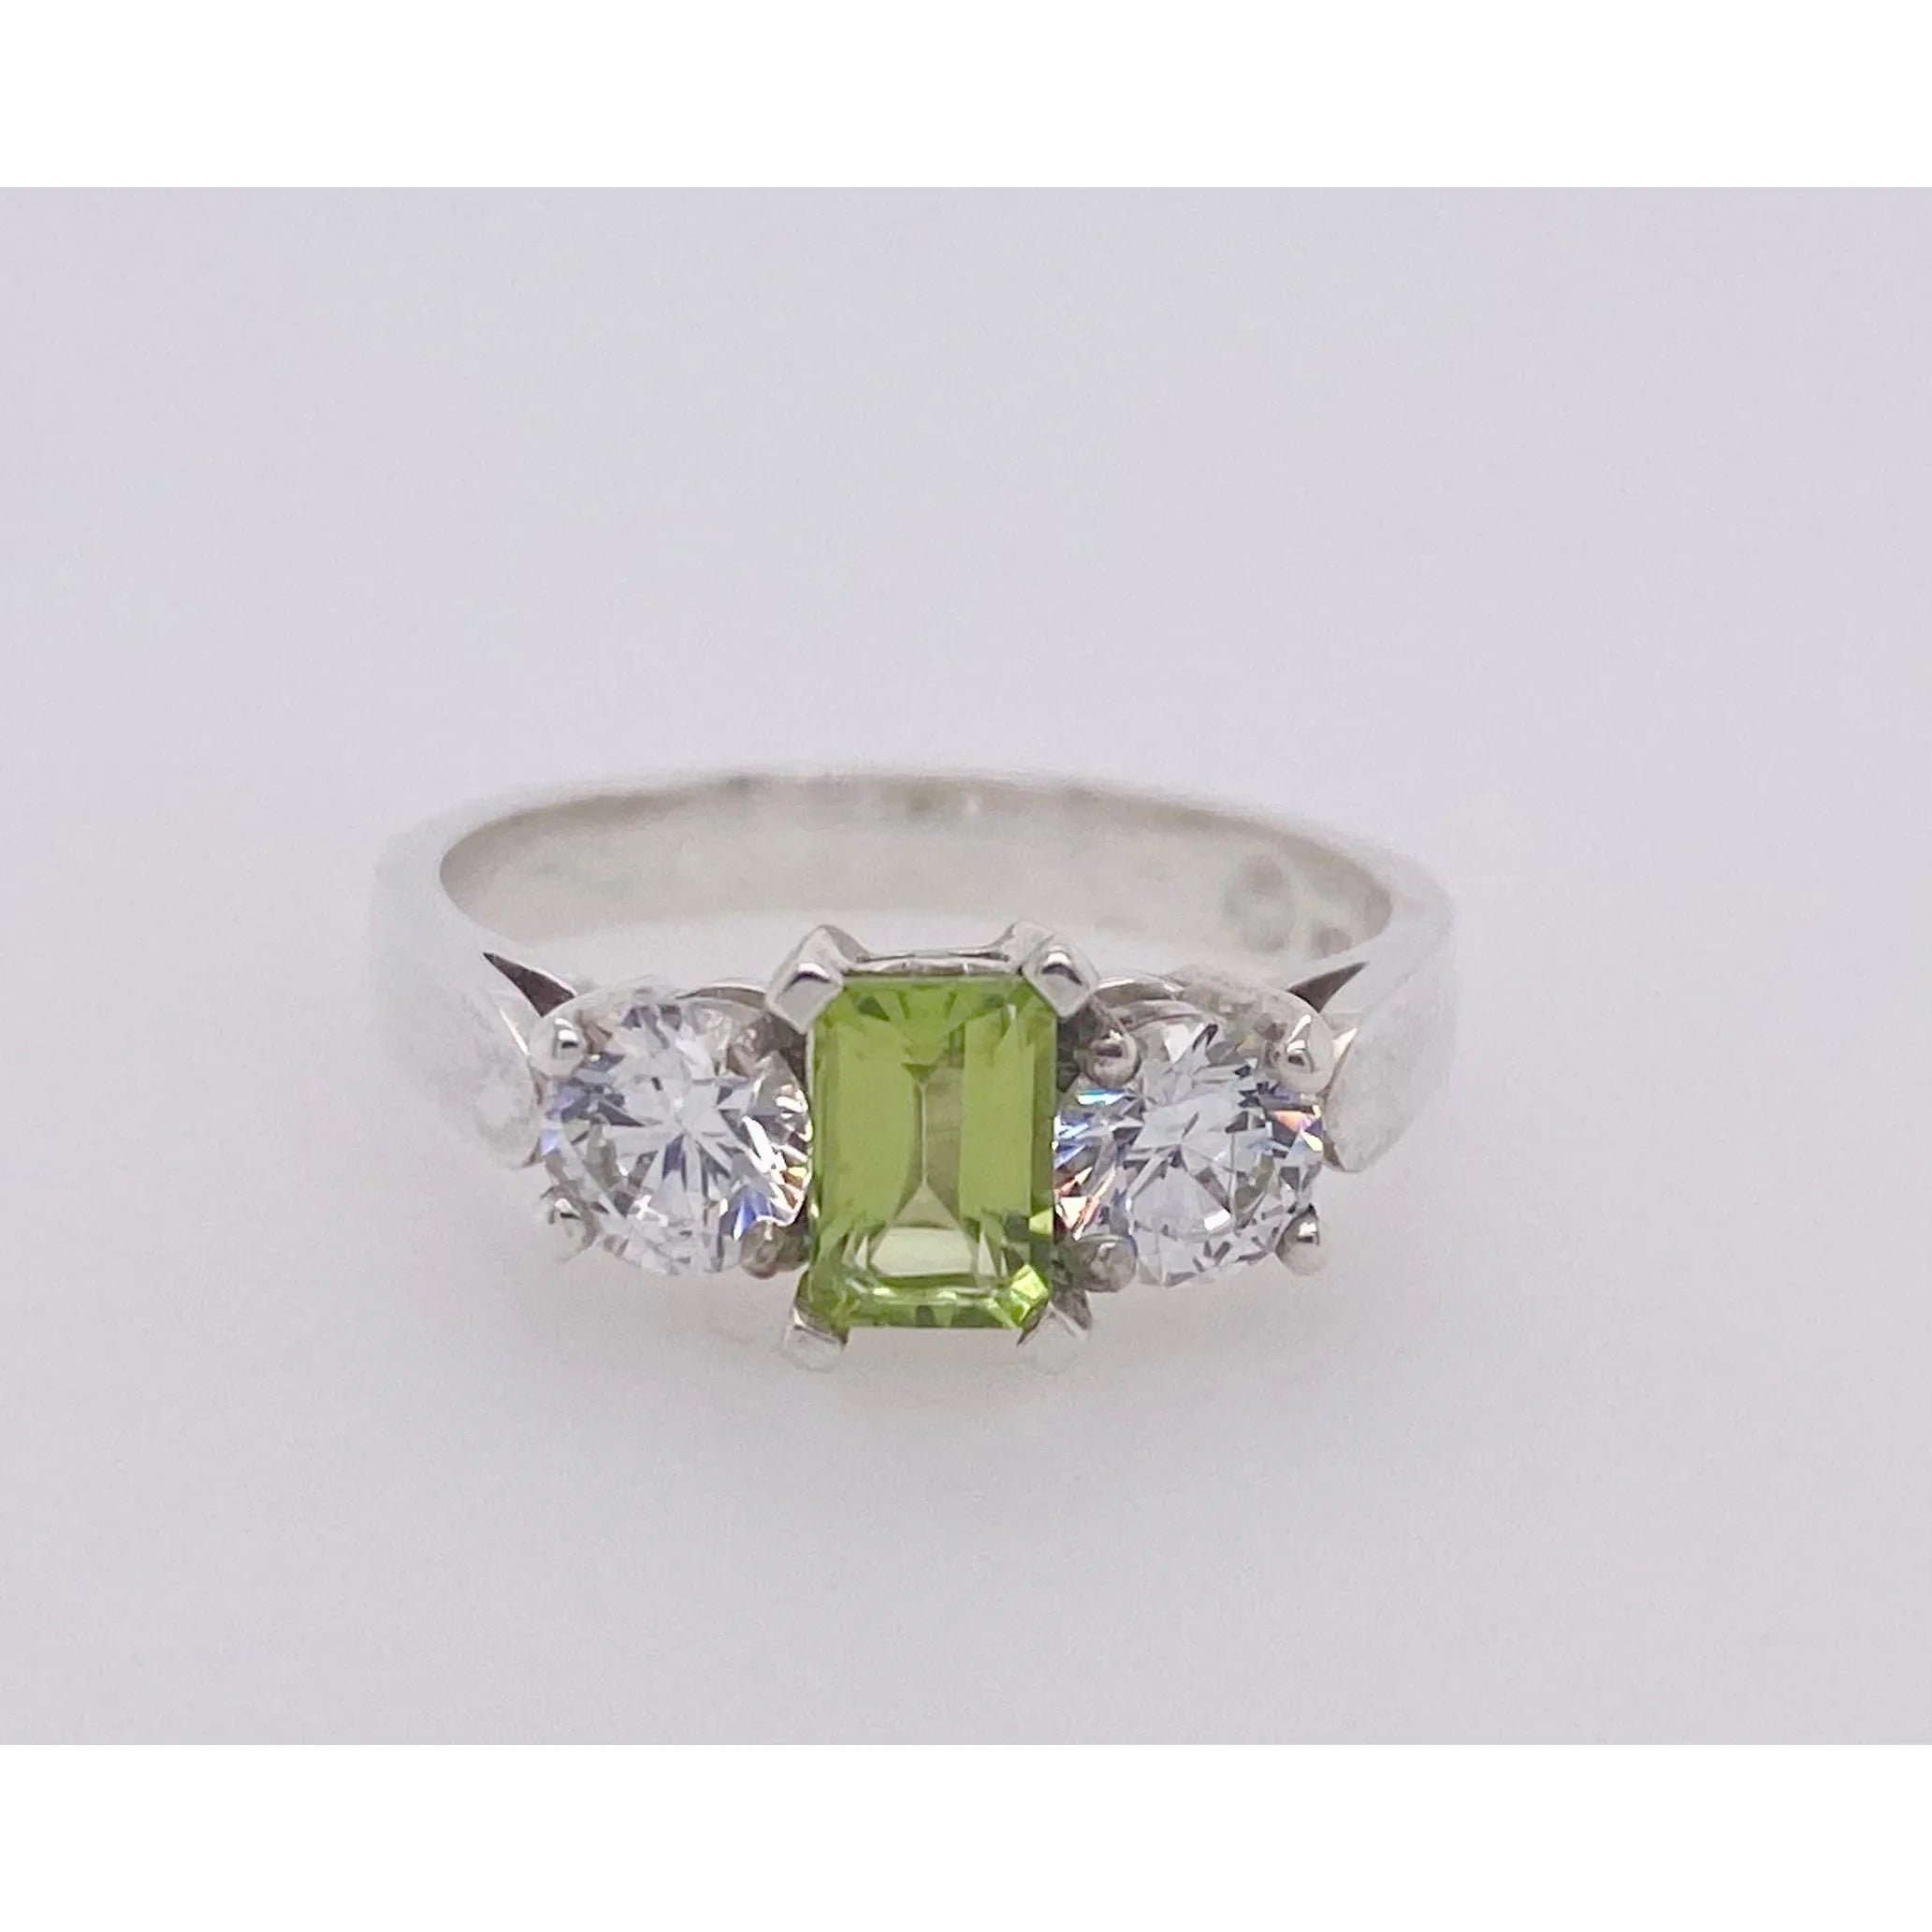 Silver Ring With Peridot and Cubic Zirconias